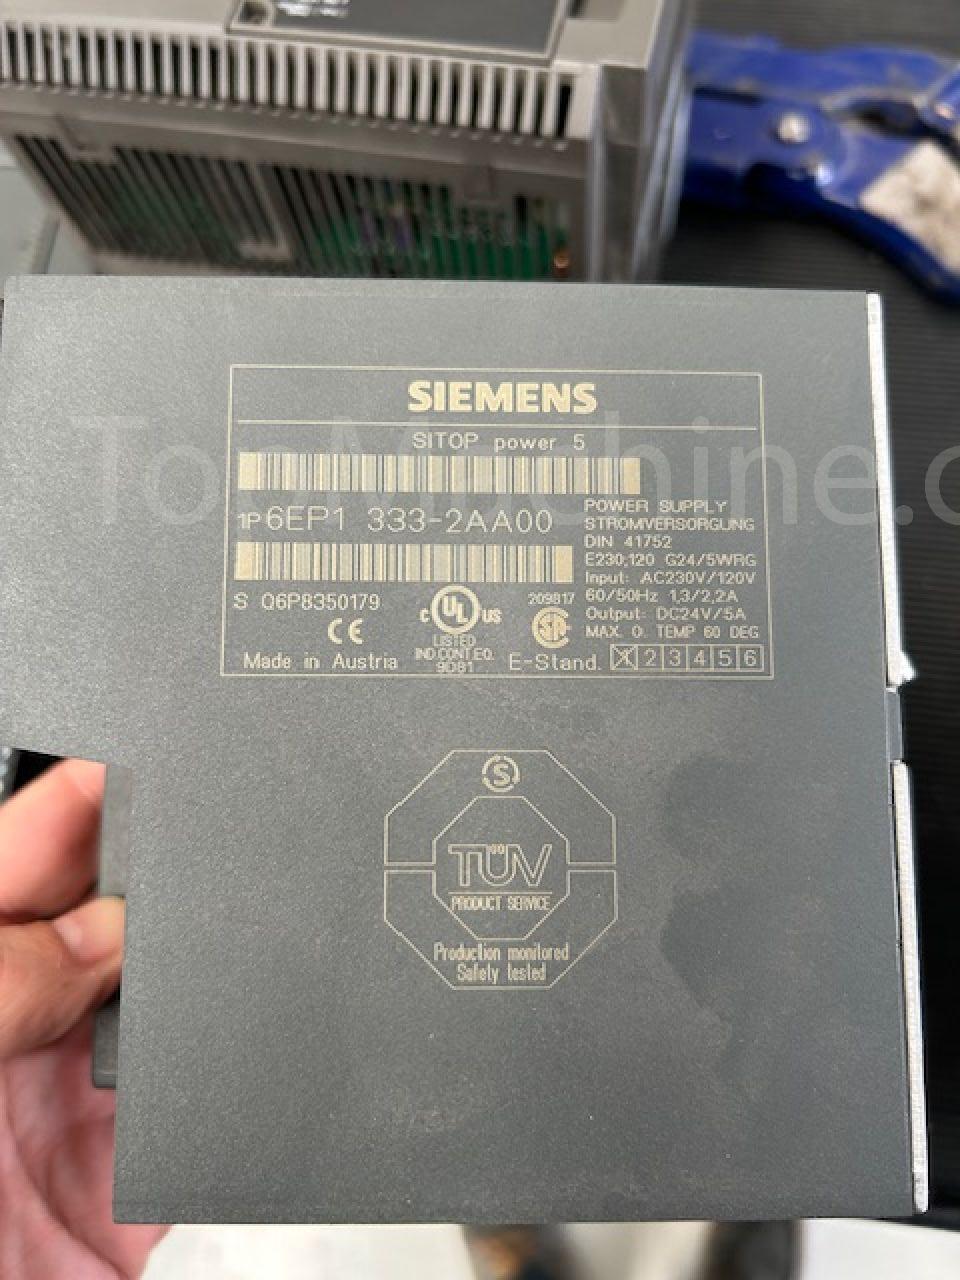 Used Siemens Sitop Power 5 Spares Electrical